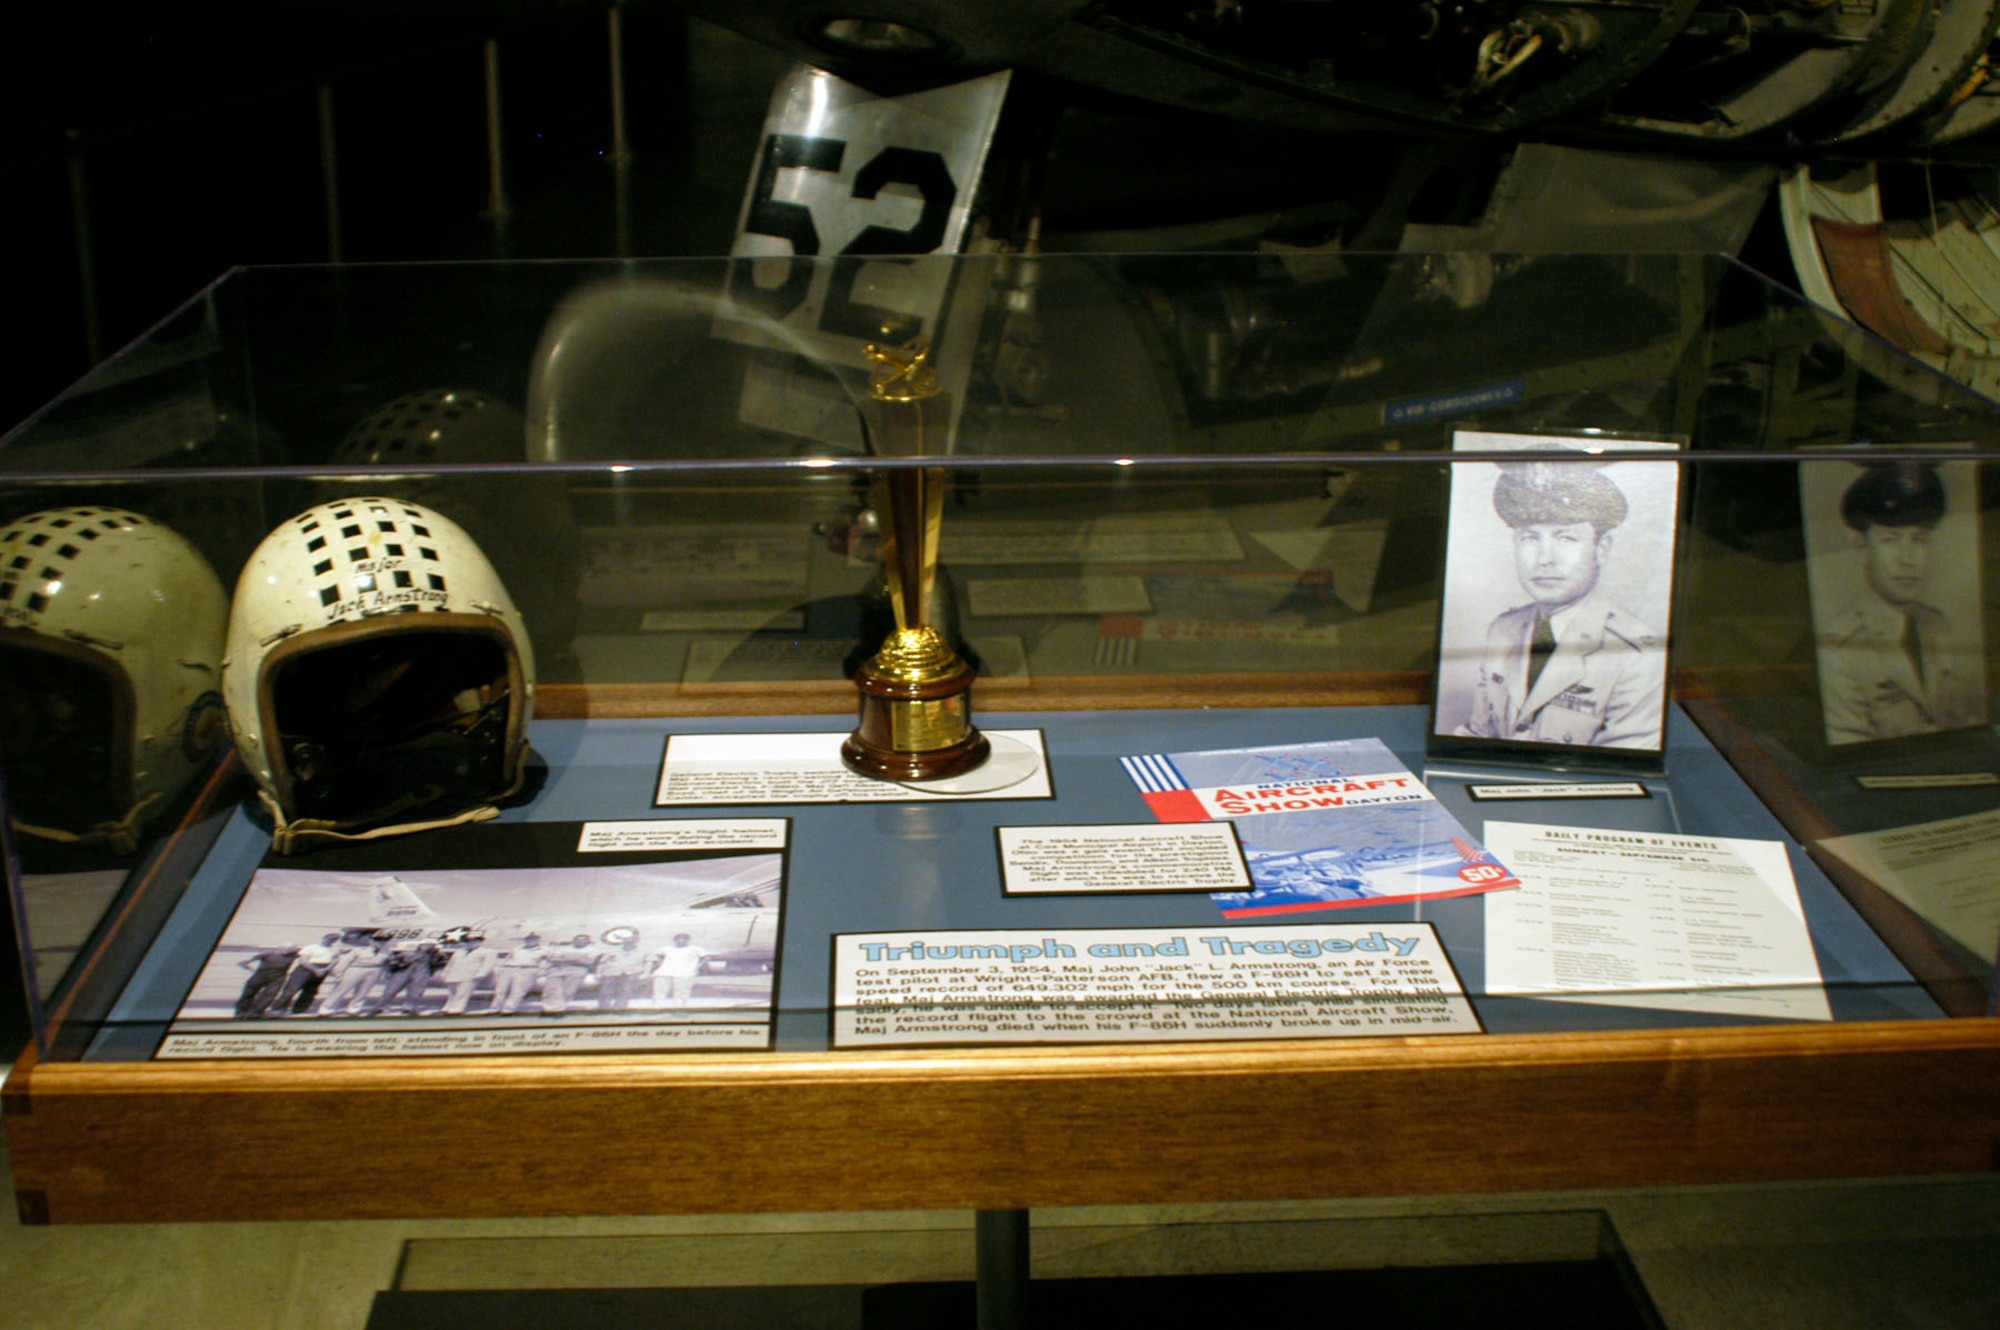 DAYTON, Ohio -- Maj. John "Jack" L. Armstrong exhibit in the Cold War Gallery at the National Museum of the United States Air Force. (U.S. Air Force photo)